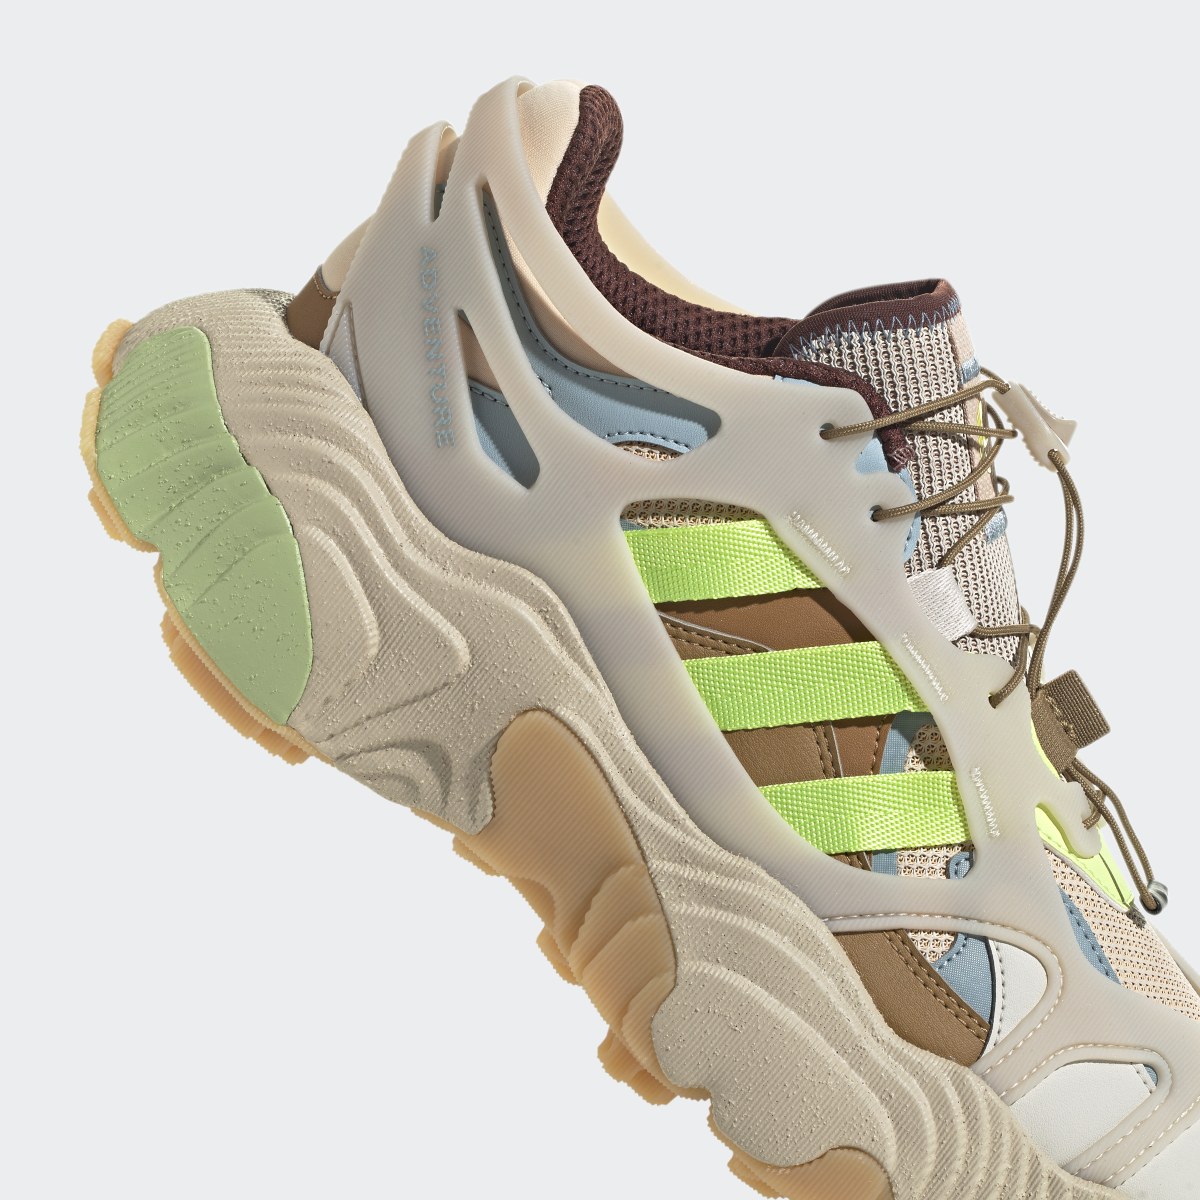 Adidas Roverend Adventure Shoes. 9